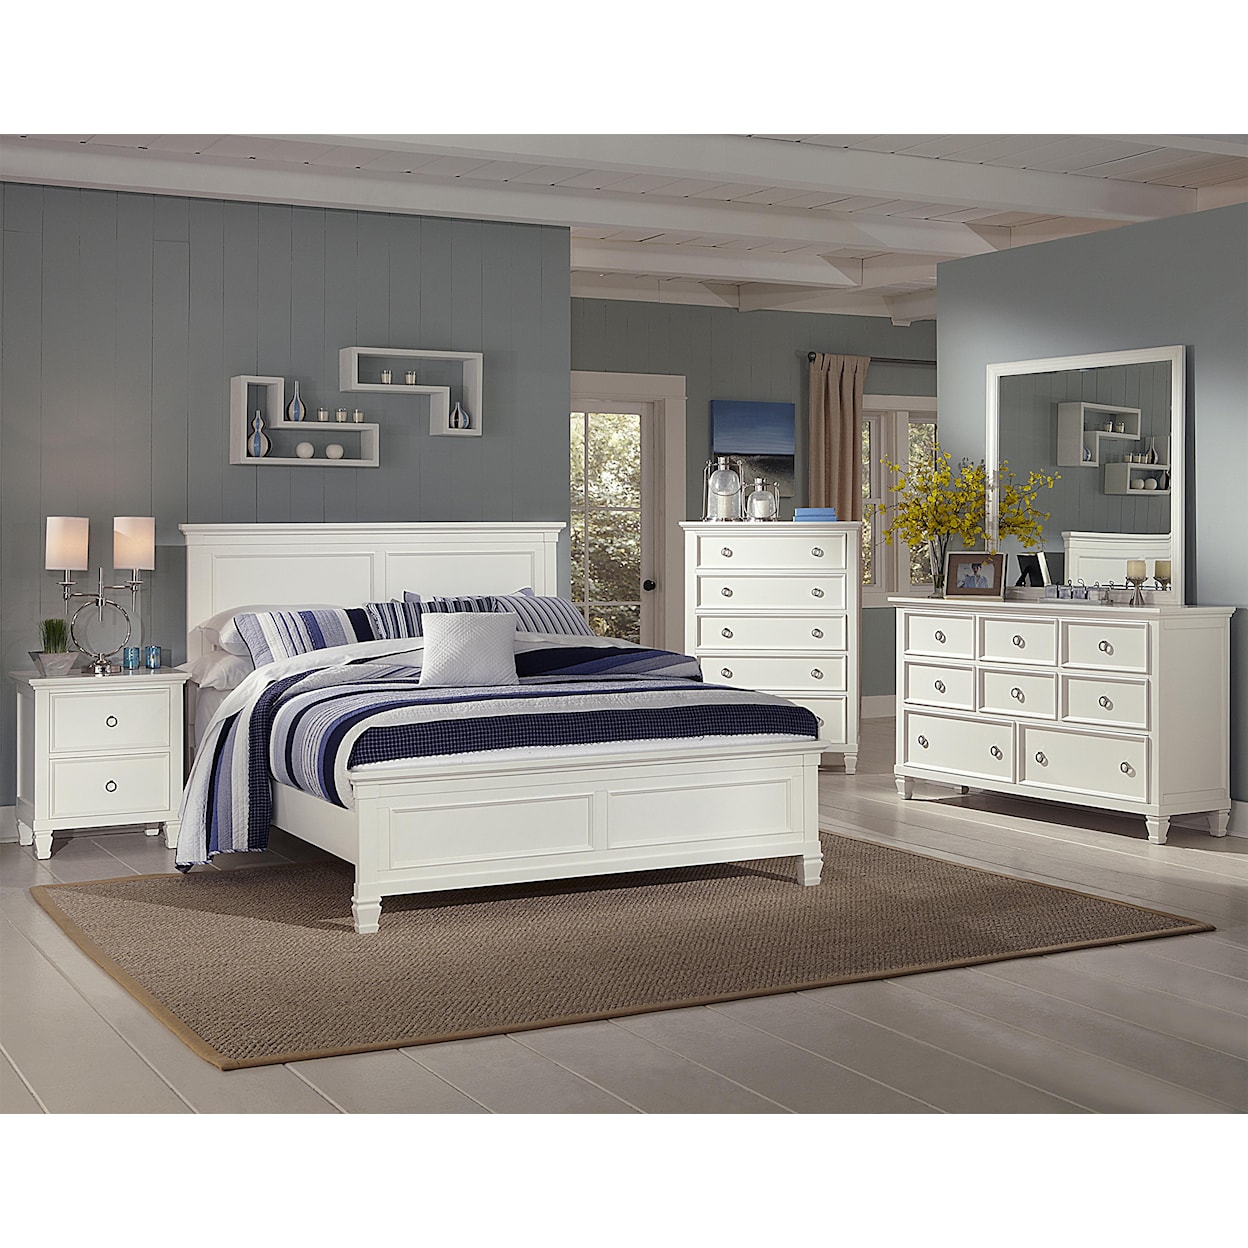 New Classic Countryside Twin Bedroom Group